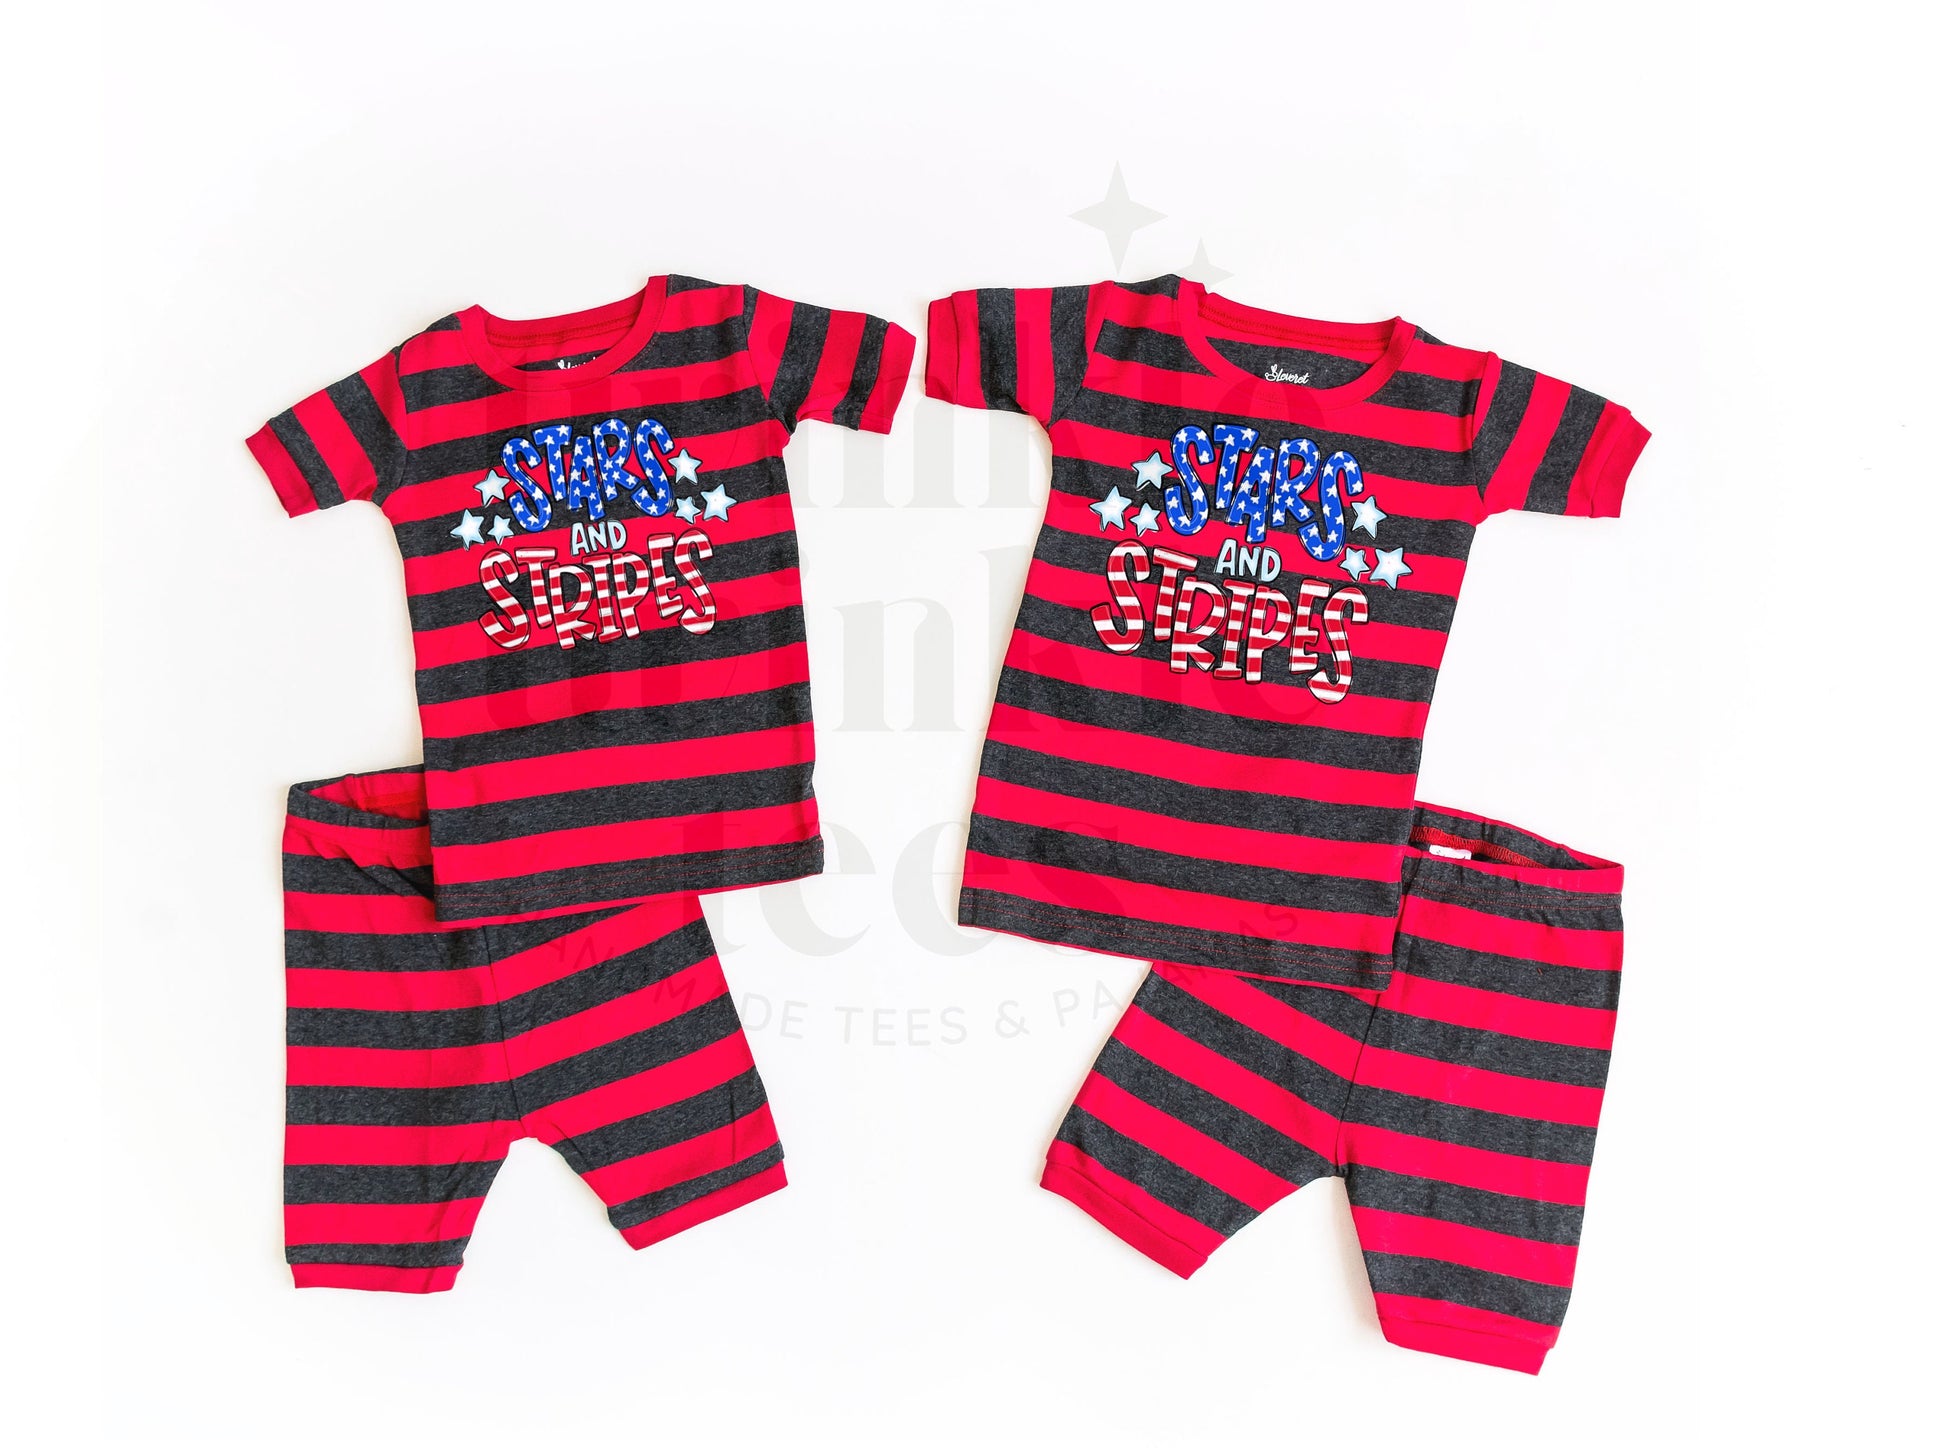 Stars and Stripes Red Striped Shorts Set for Kids - Kids 4th of July Set - 4th of July Toddler Shirt and Shorts